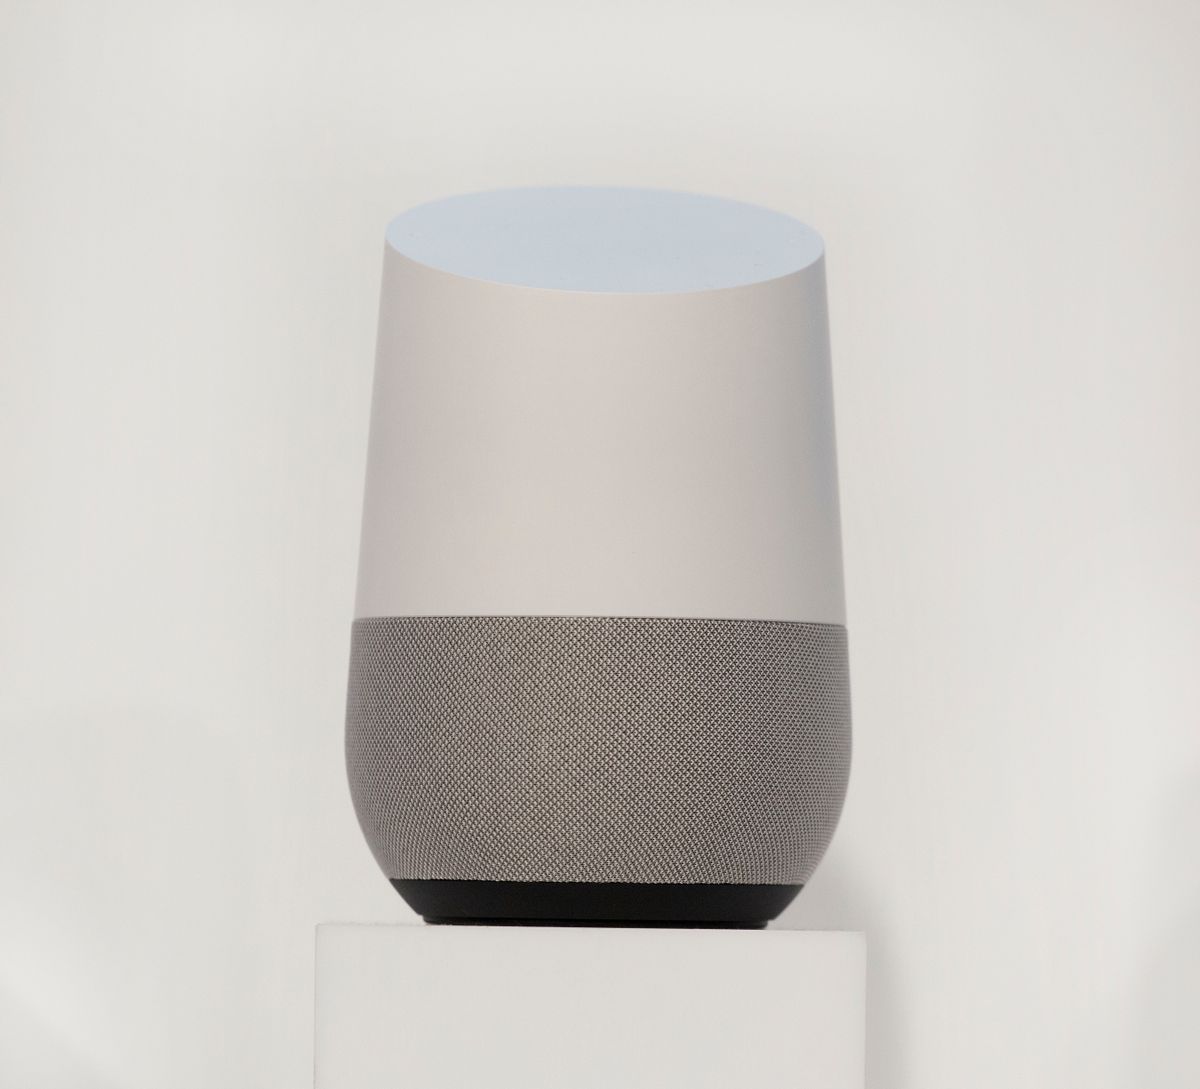 The Google Home is displayed at a Target media preview, Tuesday, Oct. 25, 2016, in New York. Target is building on last year’s successful holiday formula of luring shoppers with plenty of exclusives, clever marketing and exciting presentations. But it’s more laser focused on luring shoppers with deals as it plans its attack to win back shoppers it lost in the spring and summer. (AP Photo/Mark Lennihan) (AP)